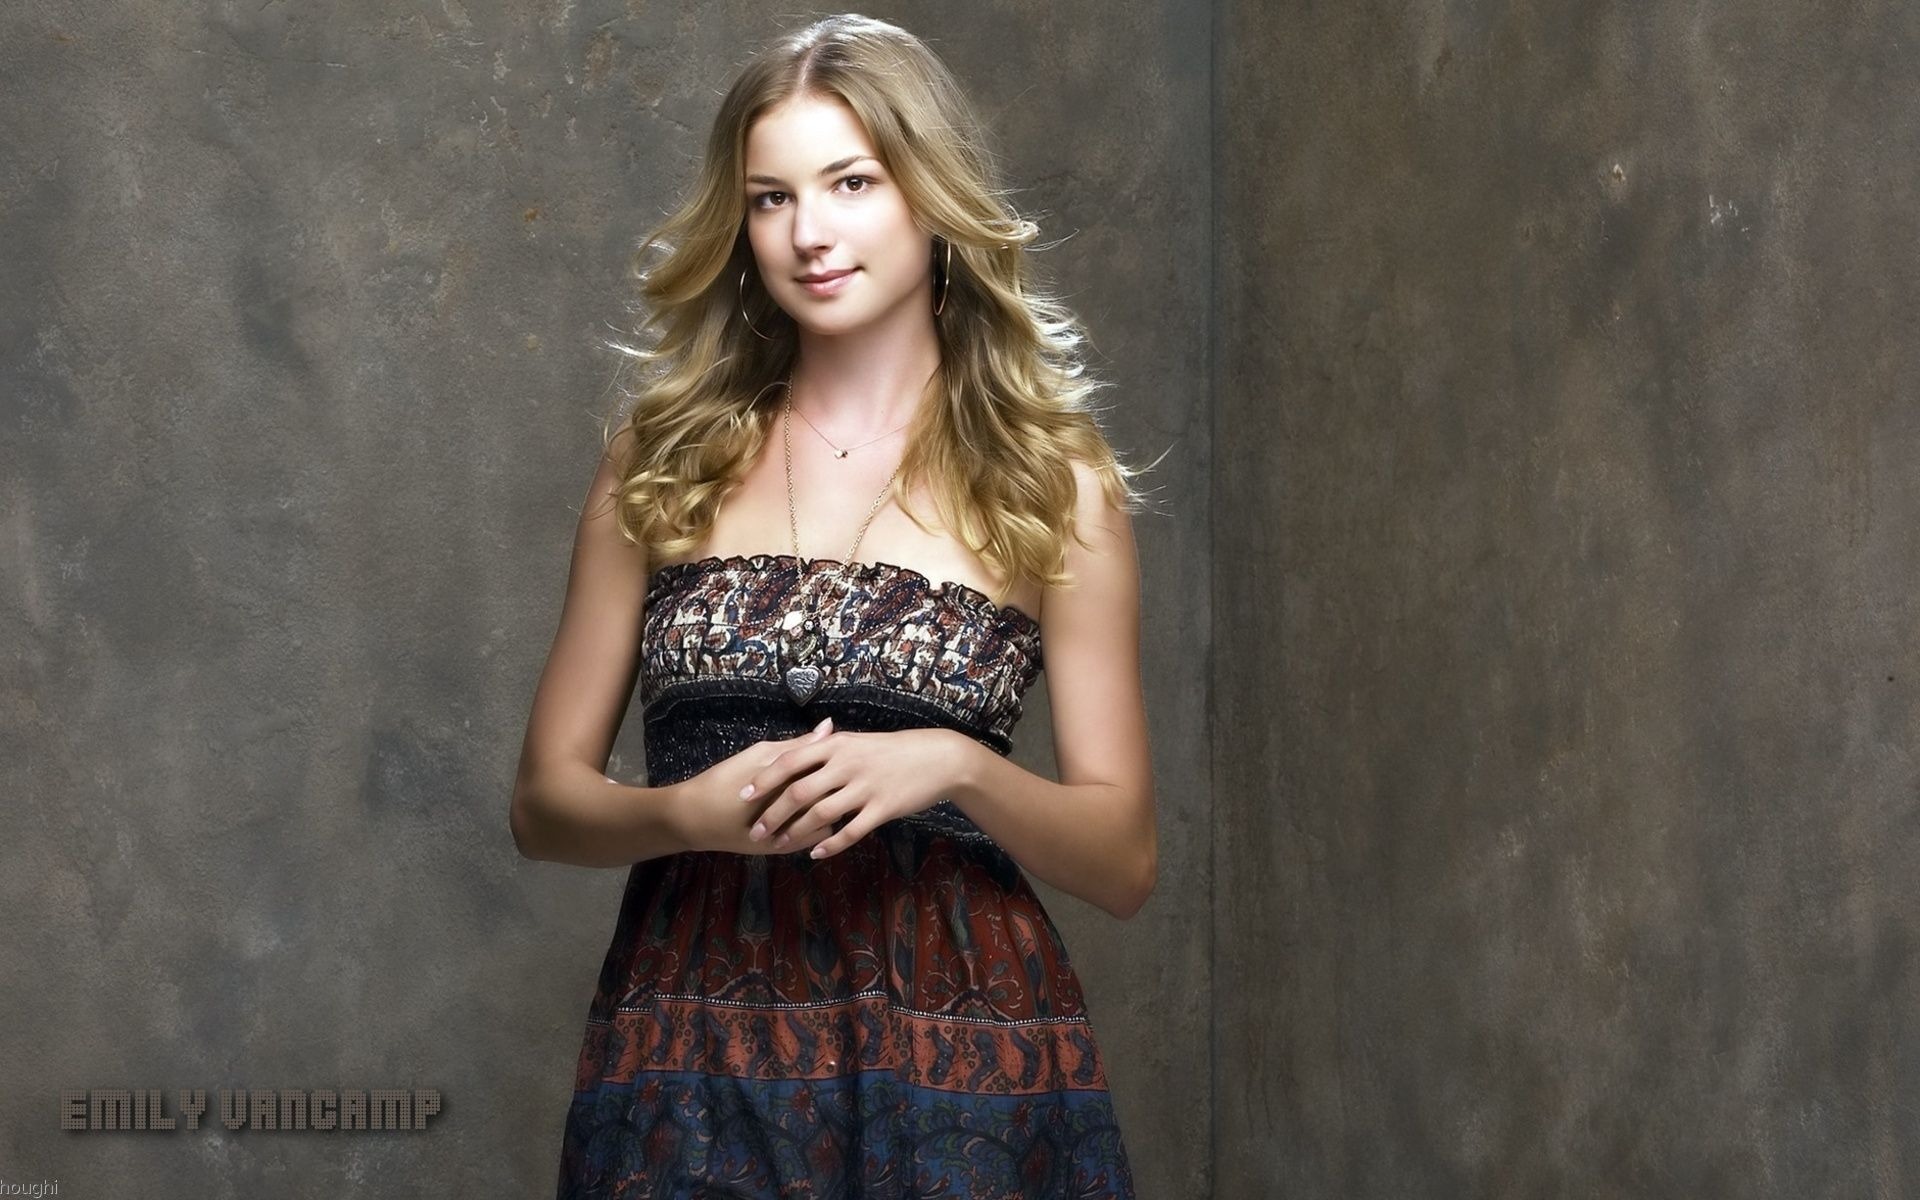 Emily VanCamp #008 - 1920x1200 Wallpapers Pictures Photos Images